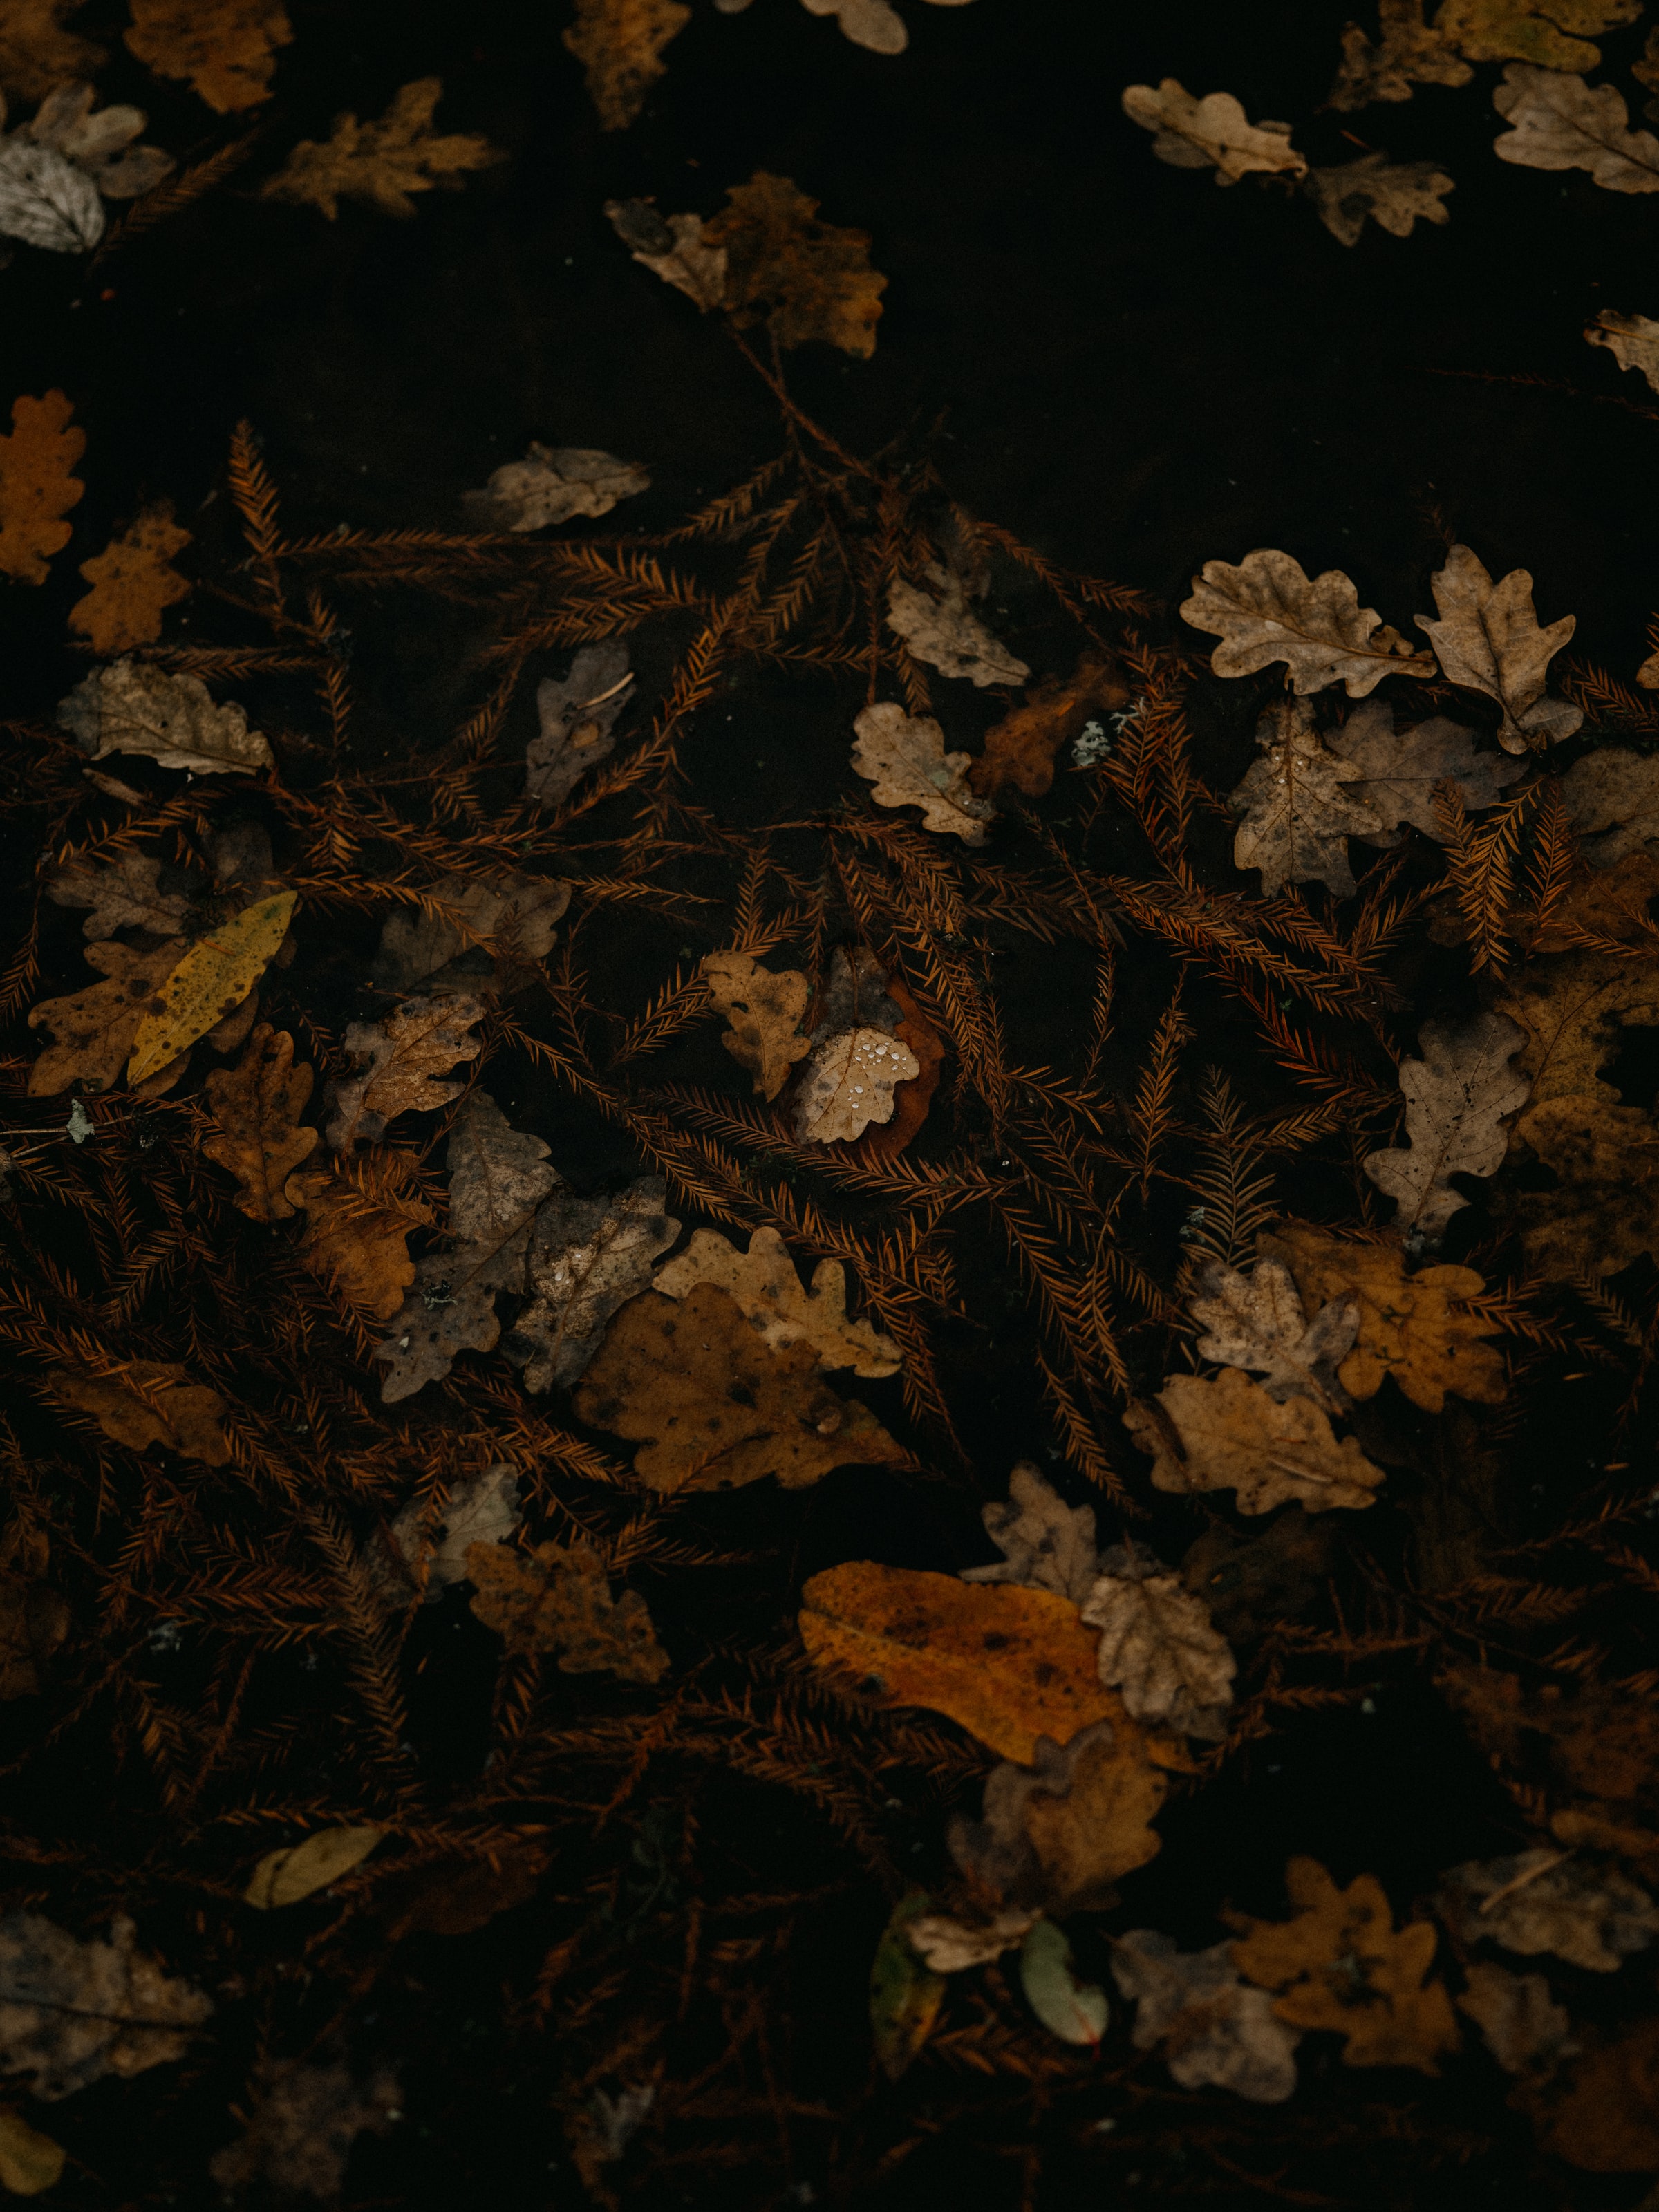 android macro, autumn, leaves, brown, dry, fallen leaves, fallen foliage